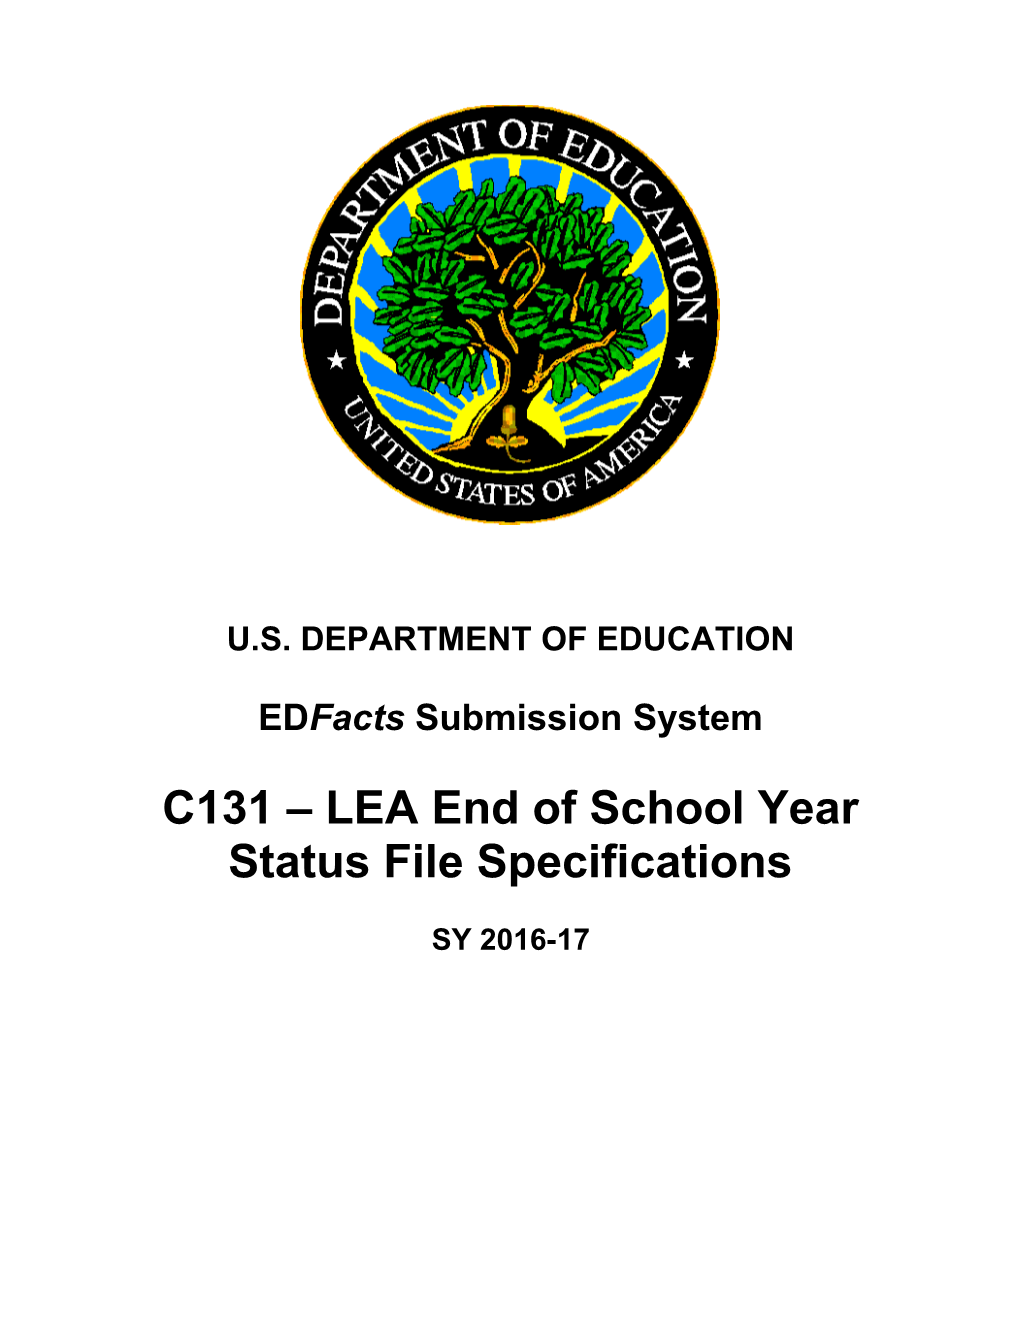 LEA End of School Year Status File Specifications